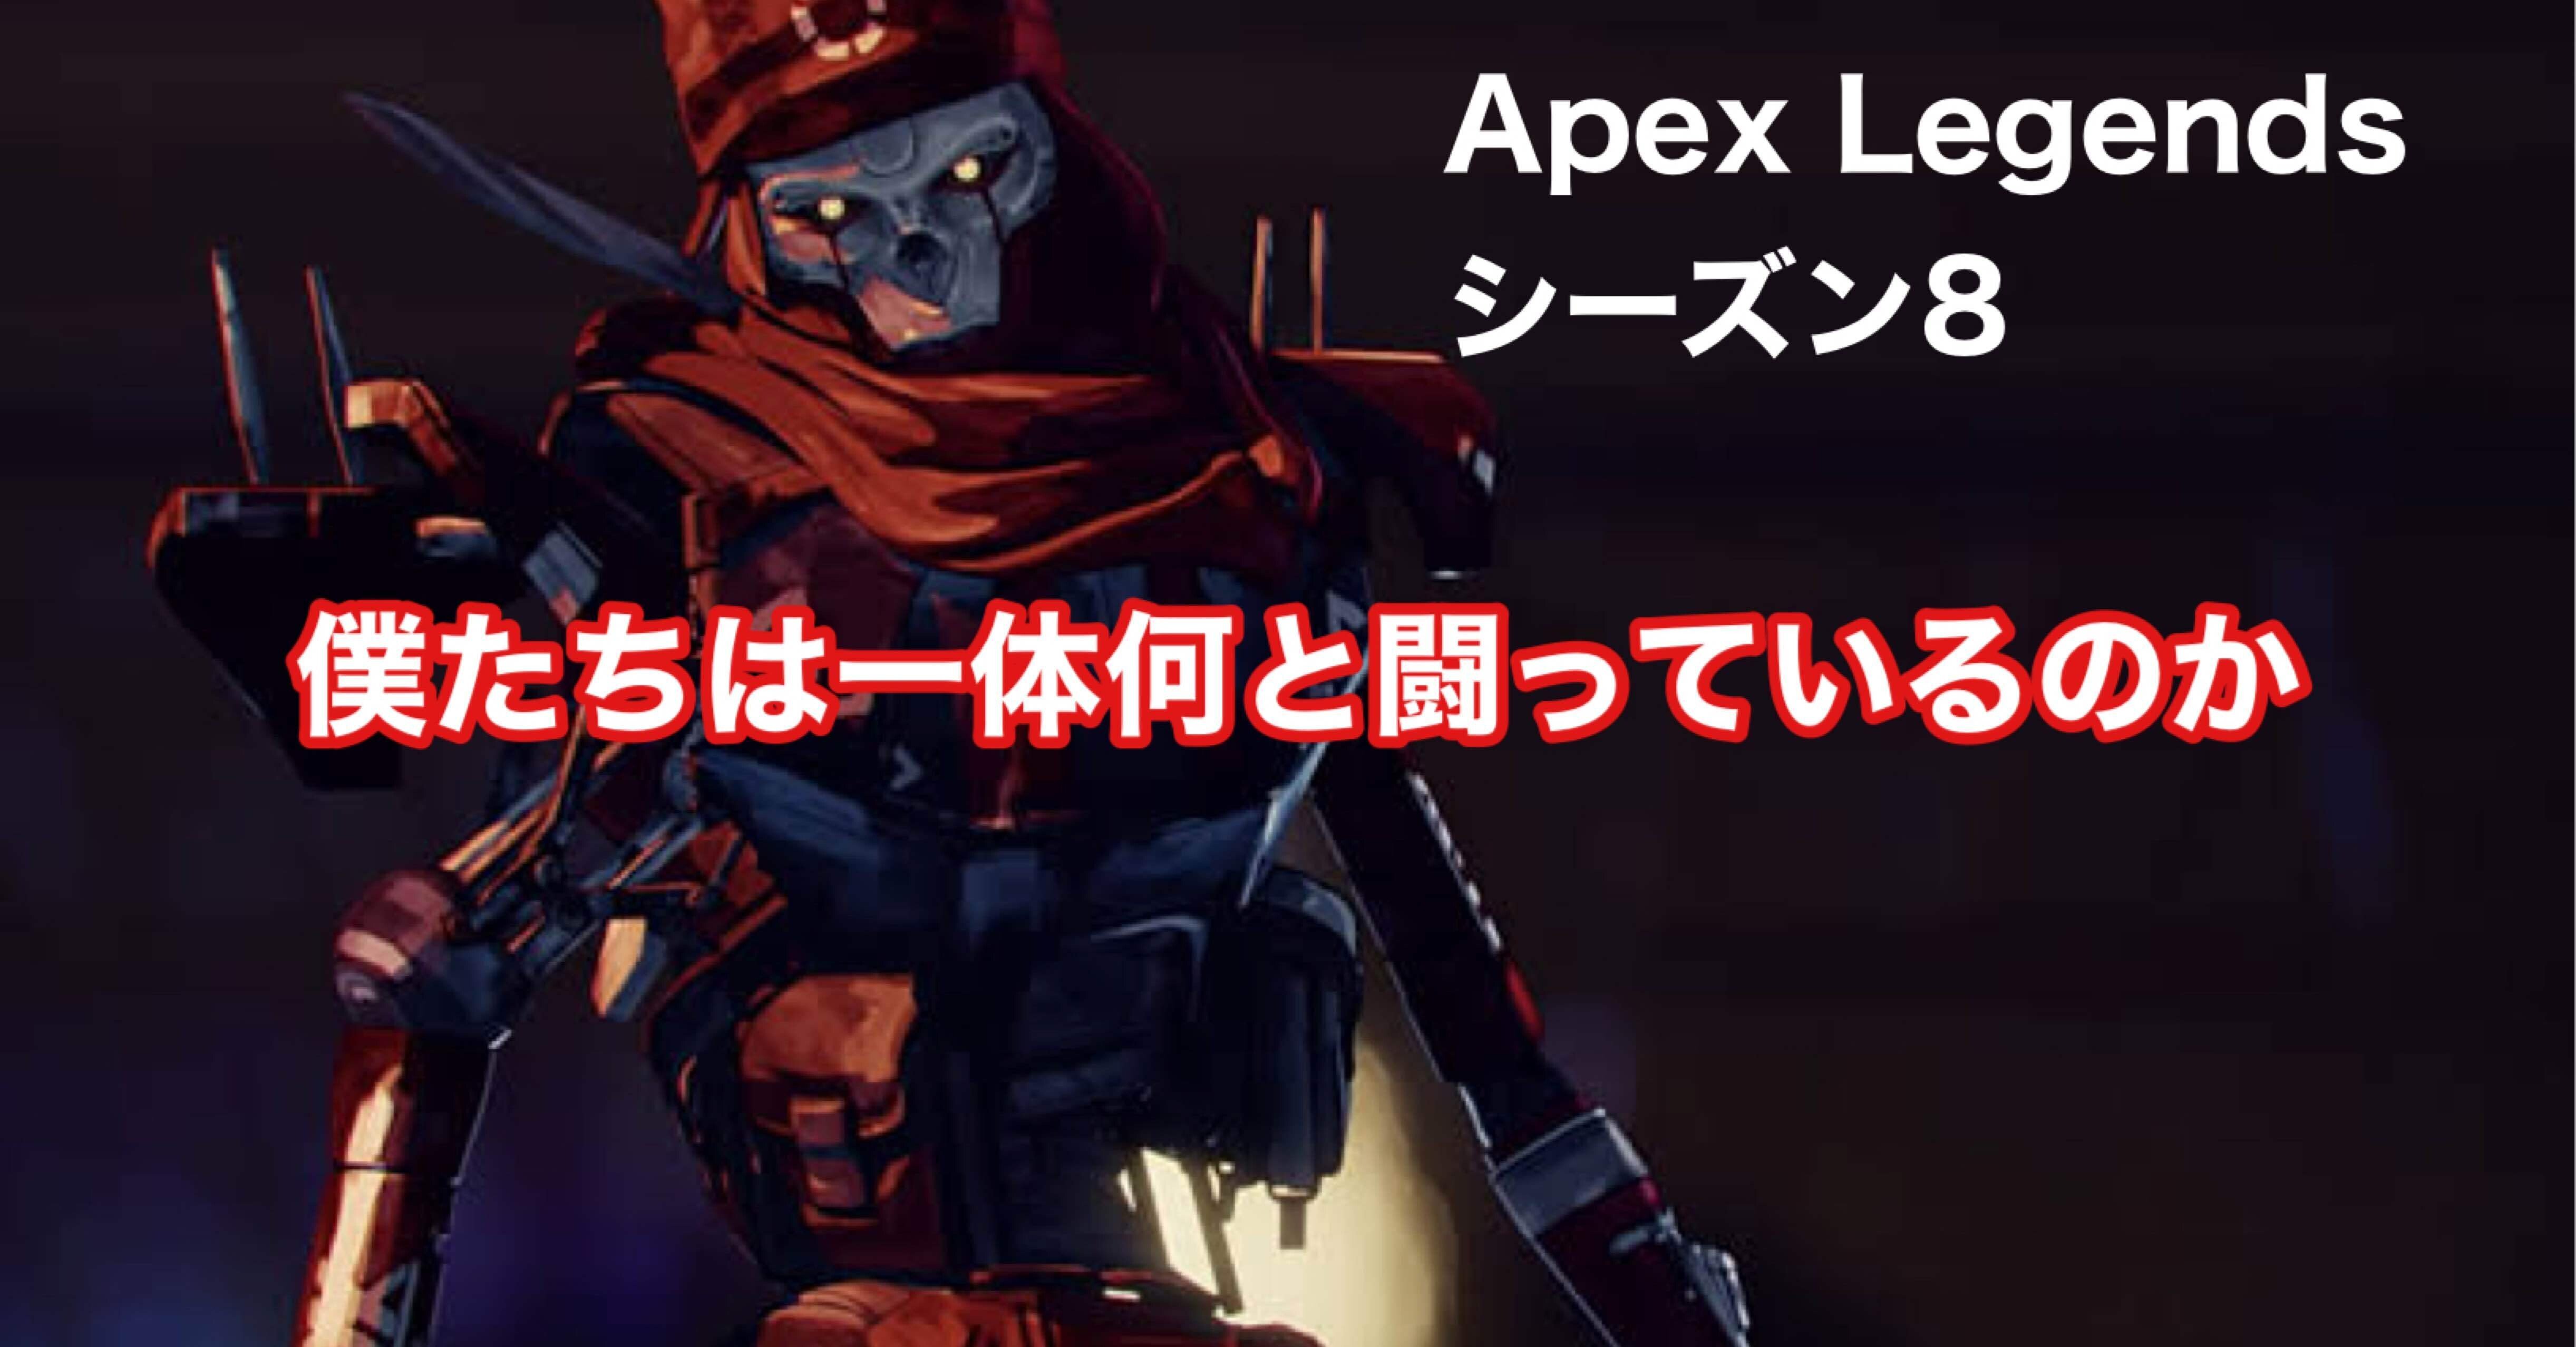 Apex Legends シーズン8 僕たちは一体何と闘っているのか Hys ひす 毎日ゲームnote Note